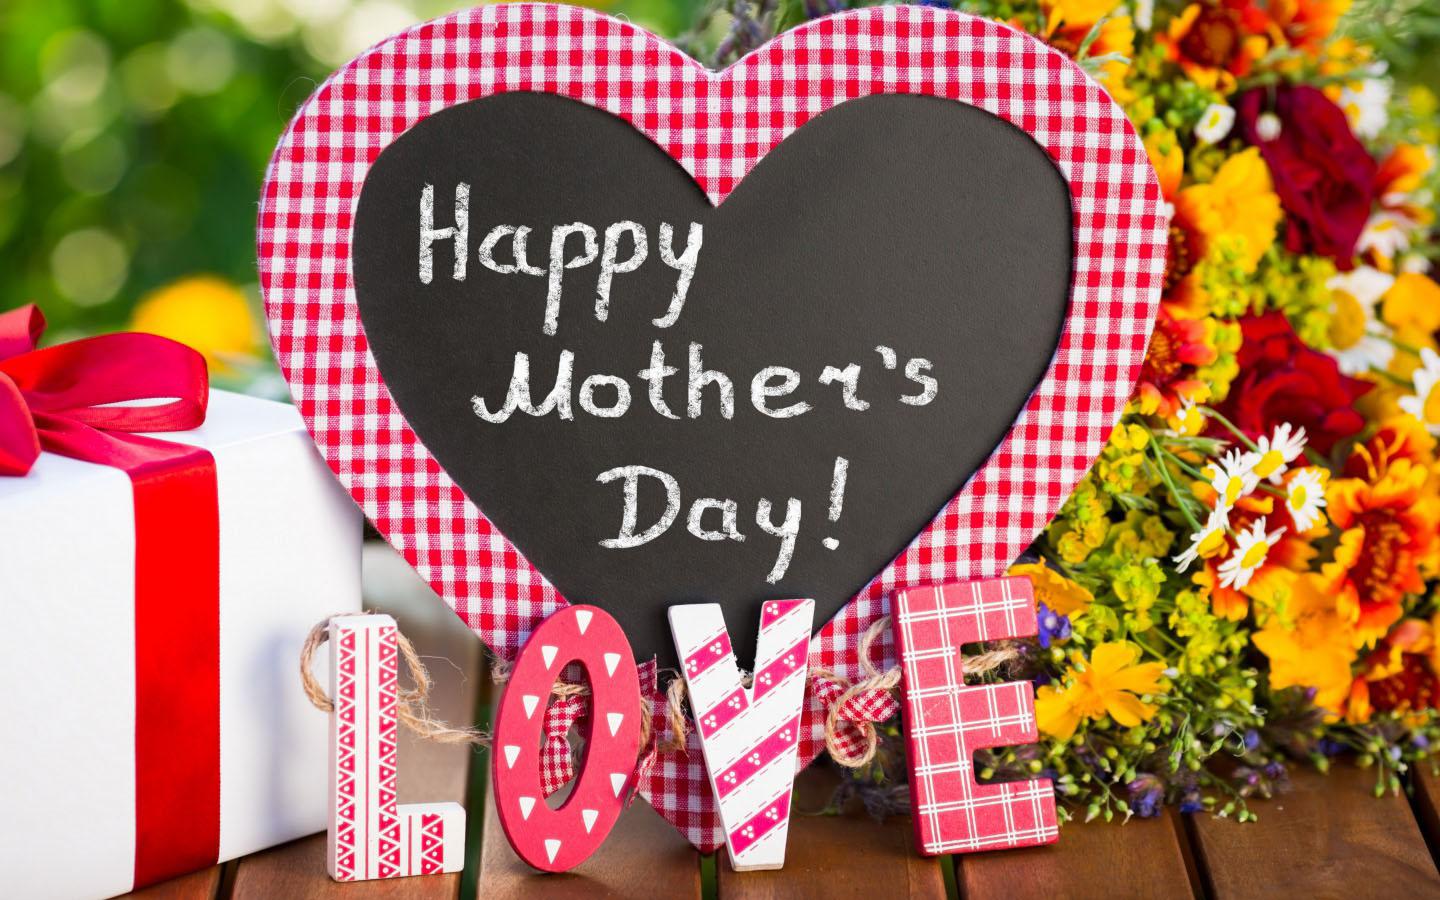 Happy Mother's Day 2020: Image, GIF, Greetings & Wishes for Your